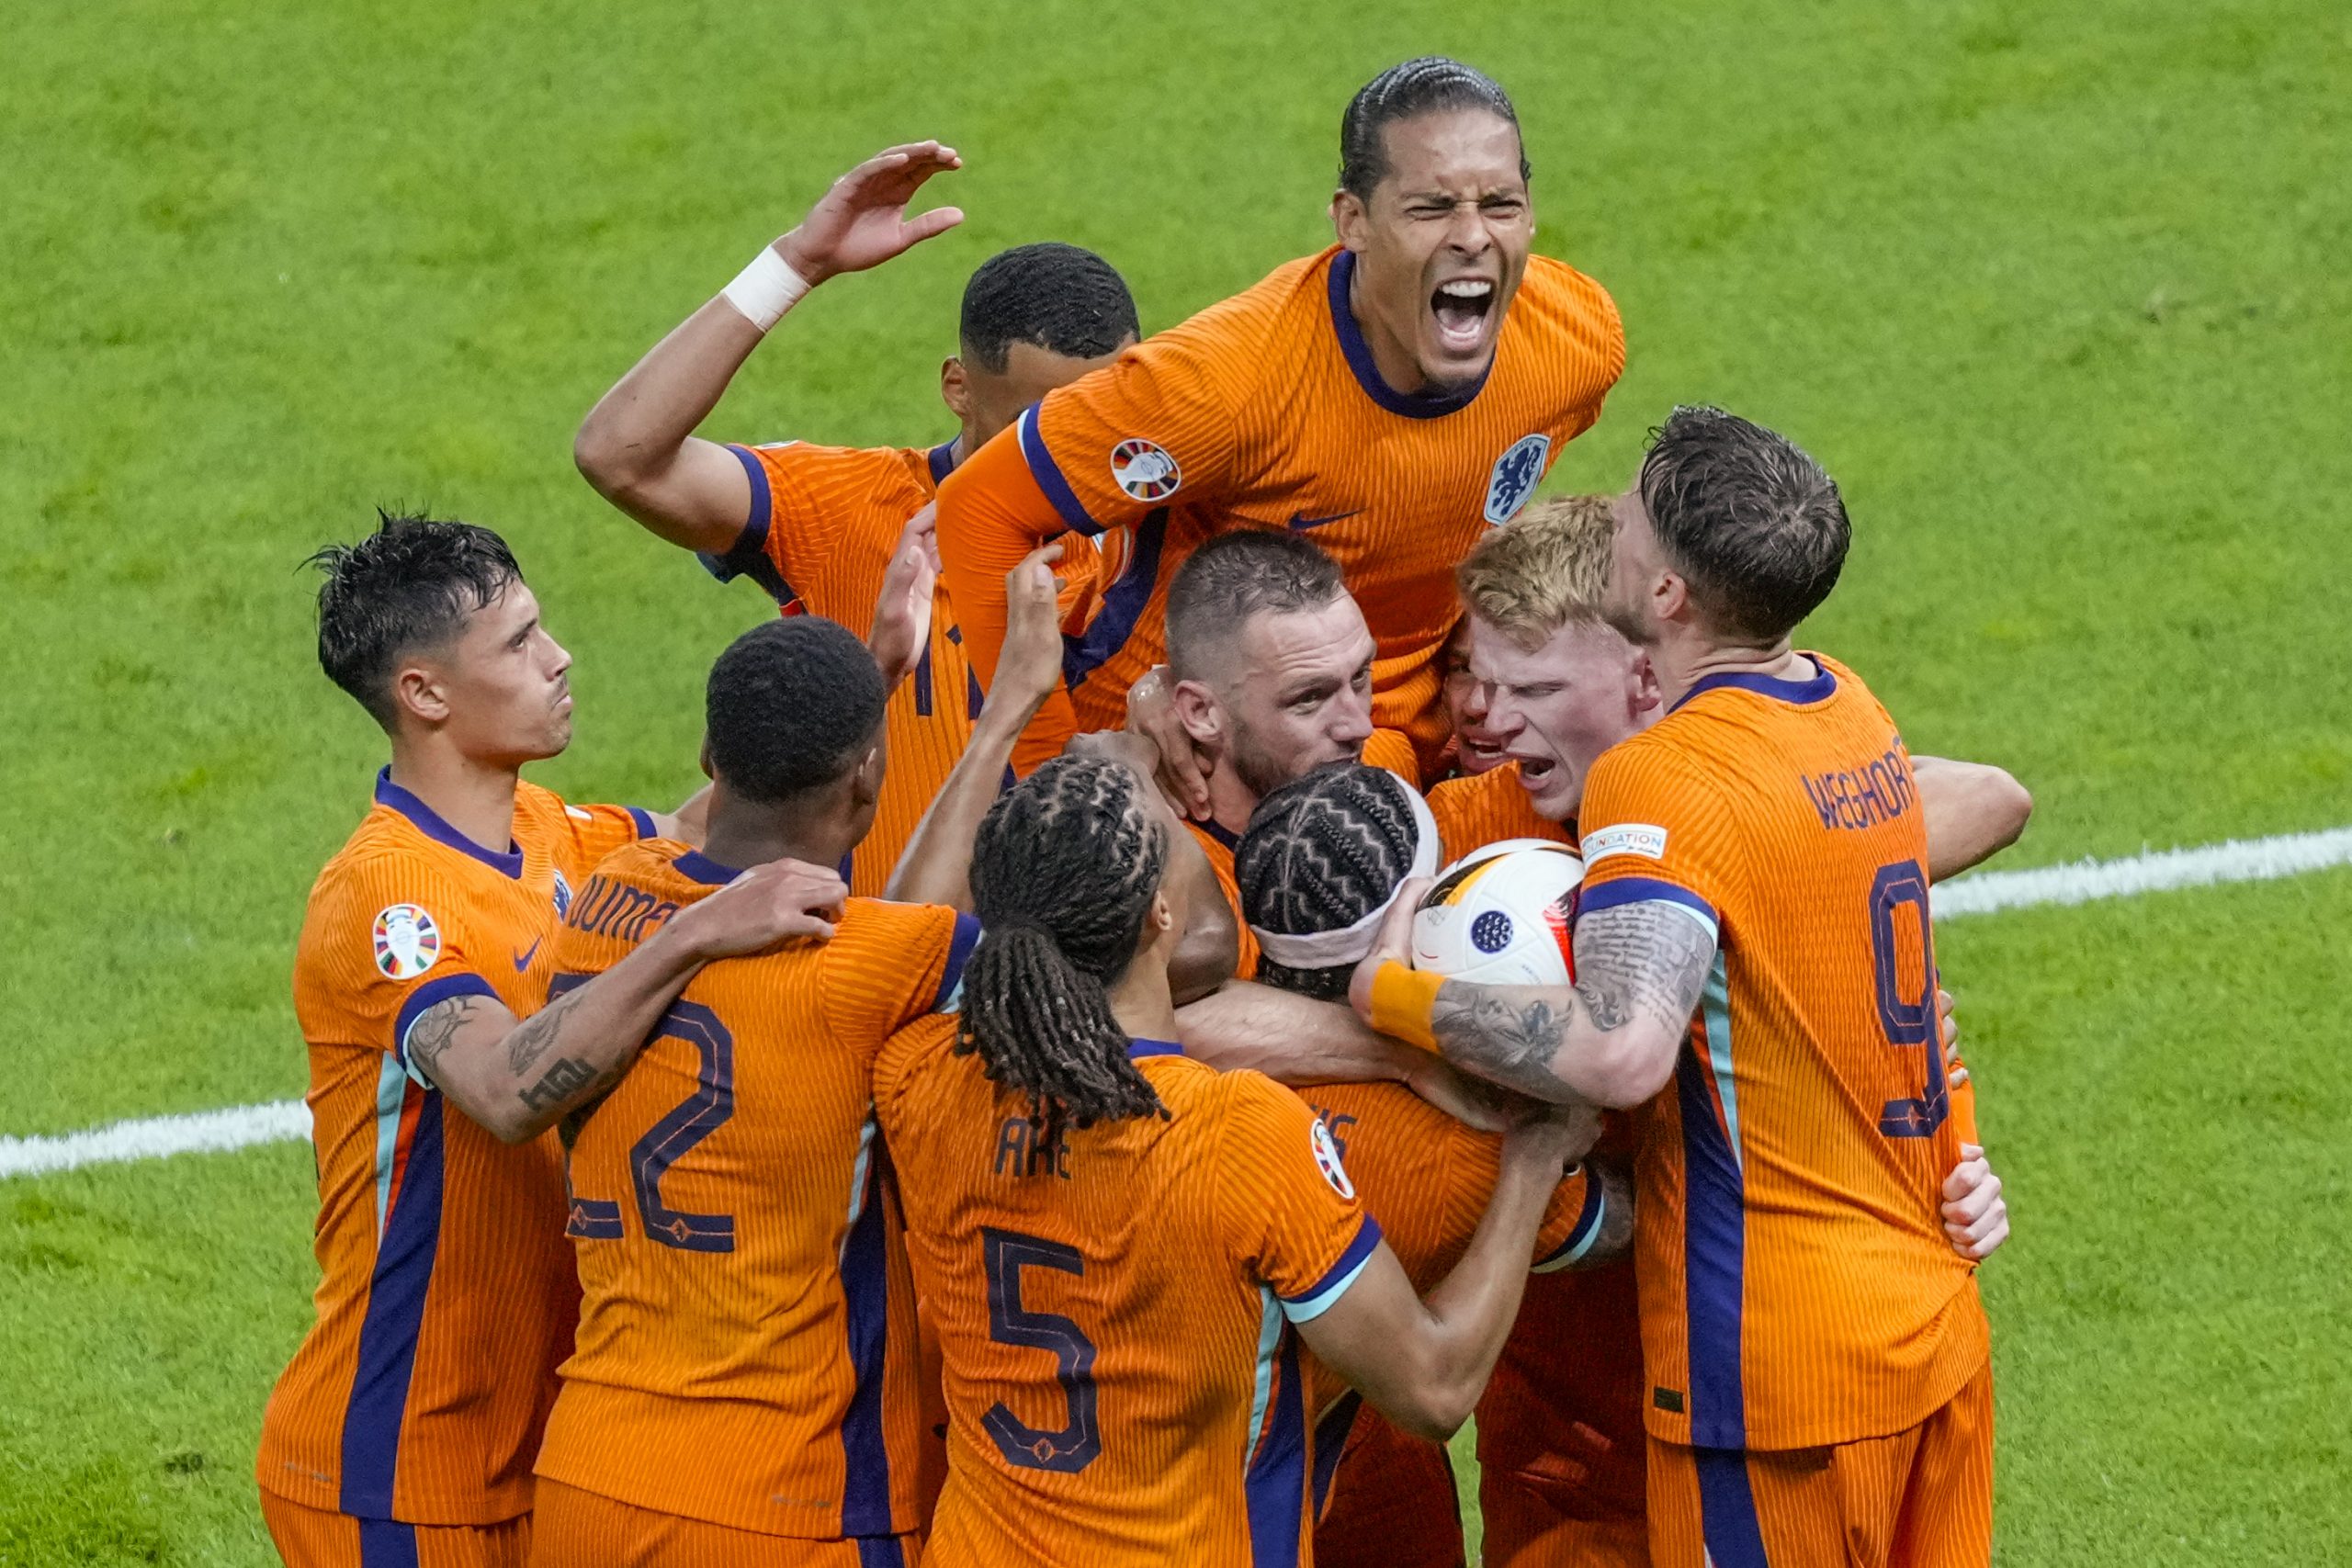 Netherlands 2 Turkey 1: Dutch set up huge semi-final clash with England as own goal caps comeback win